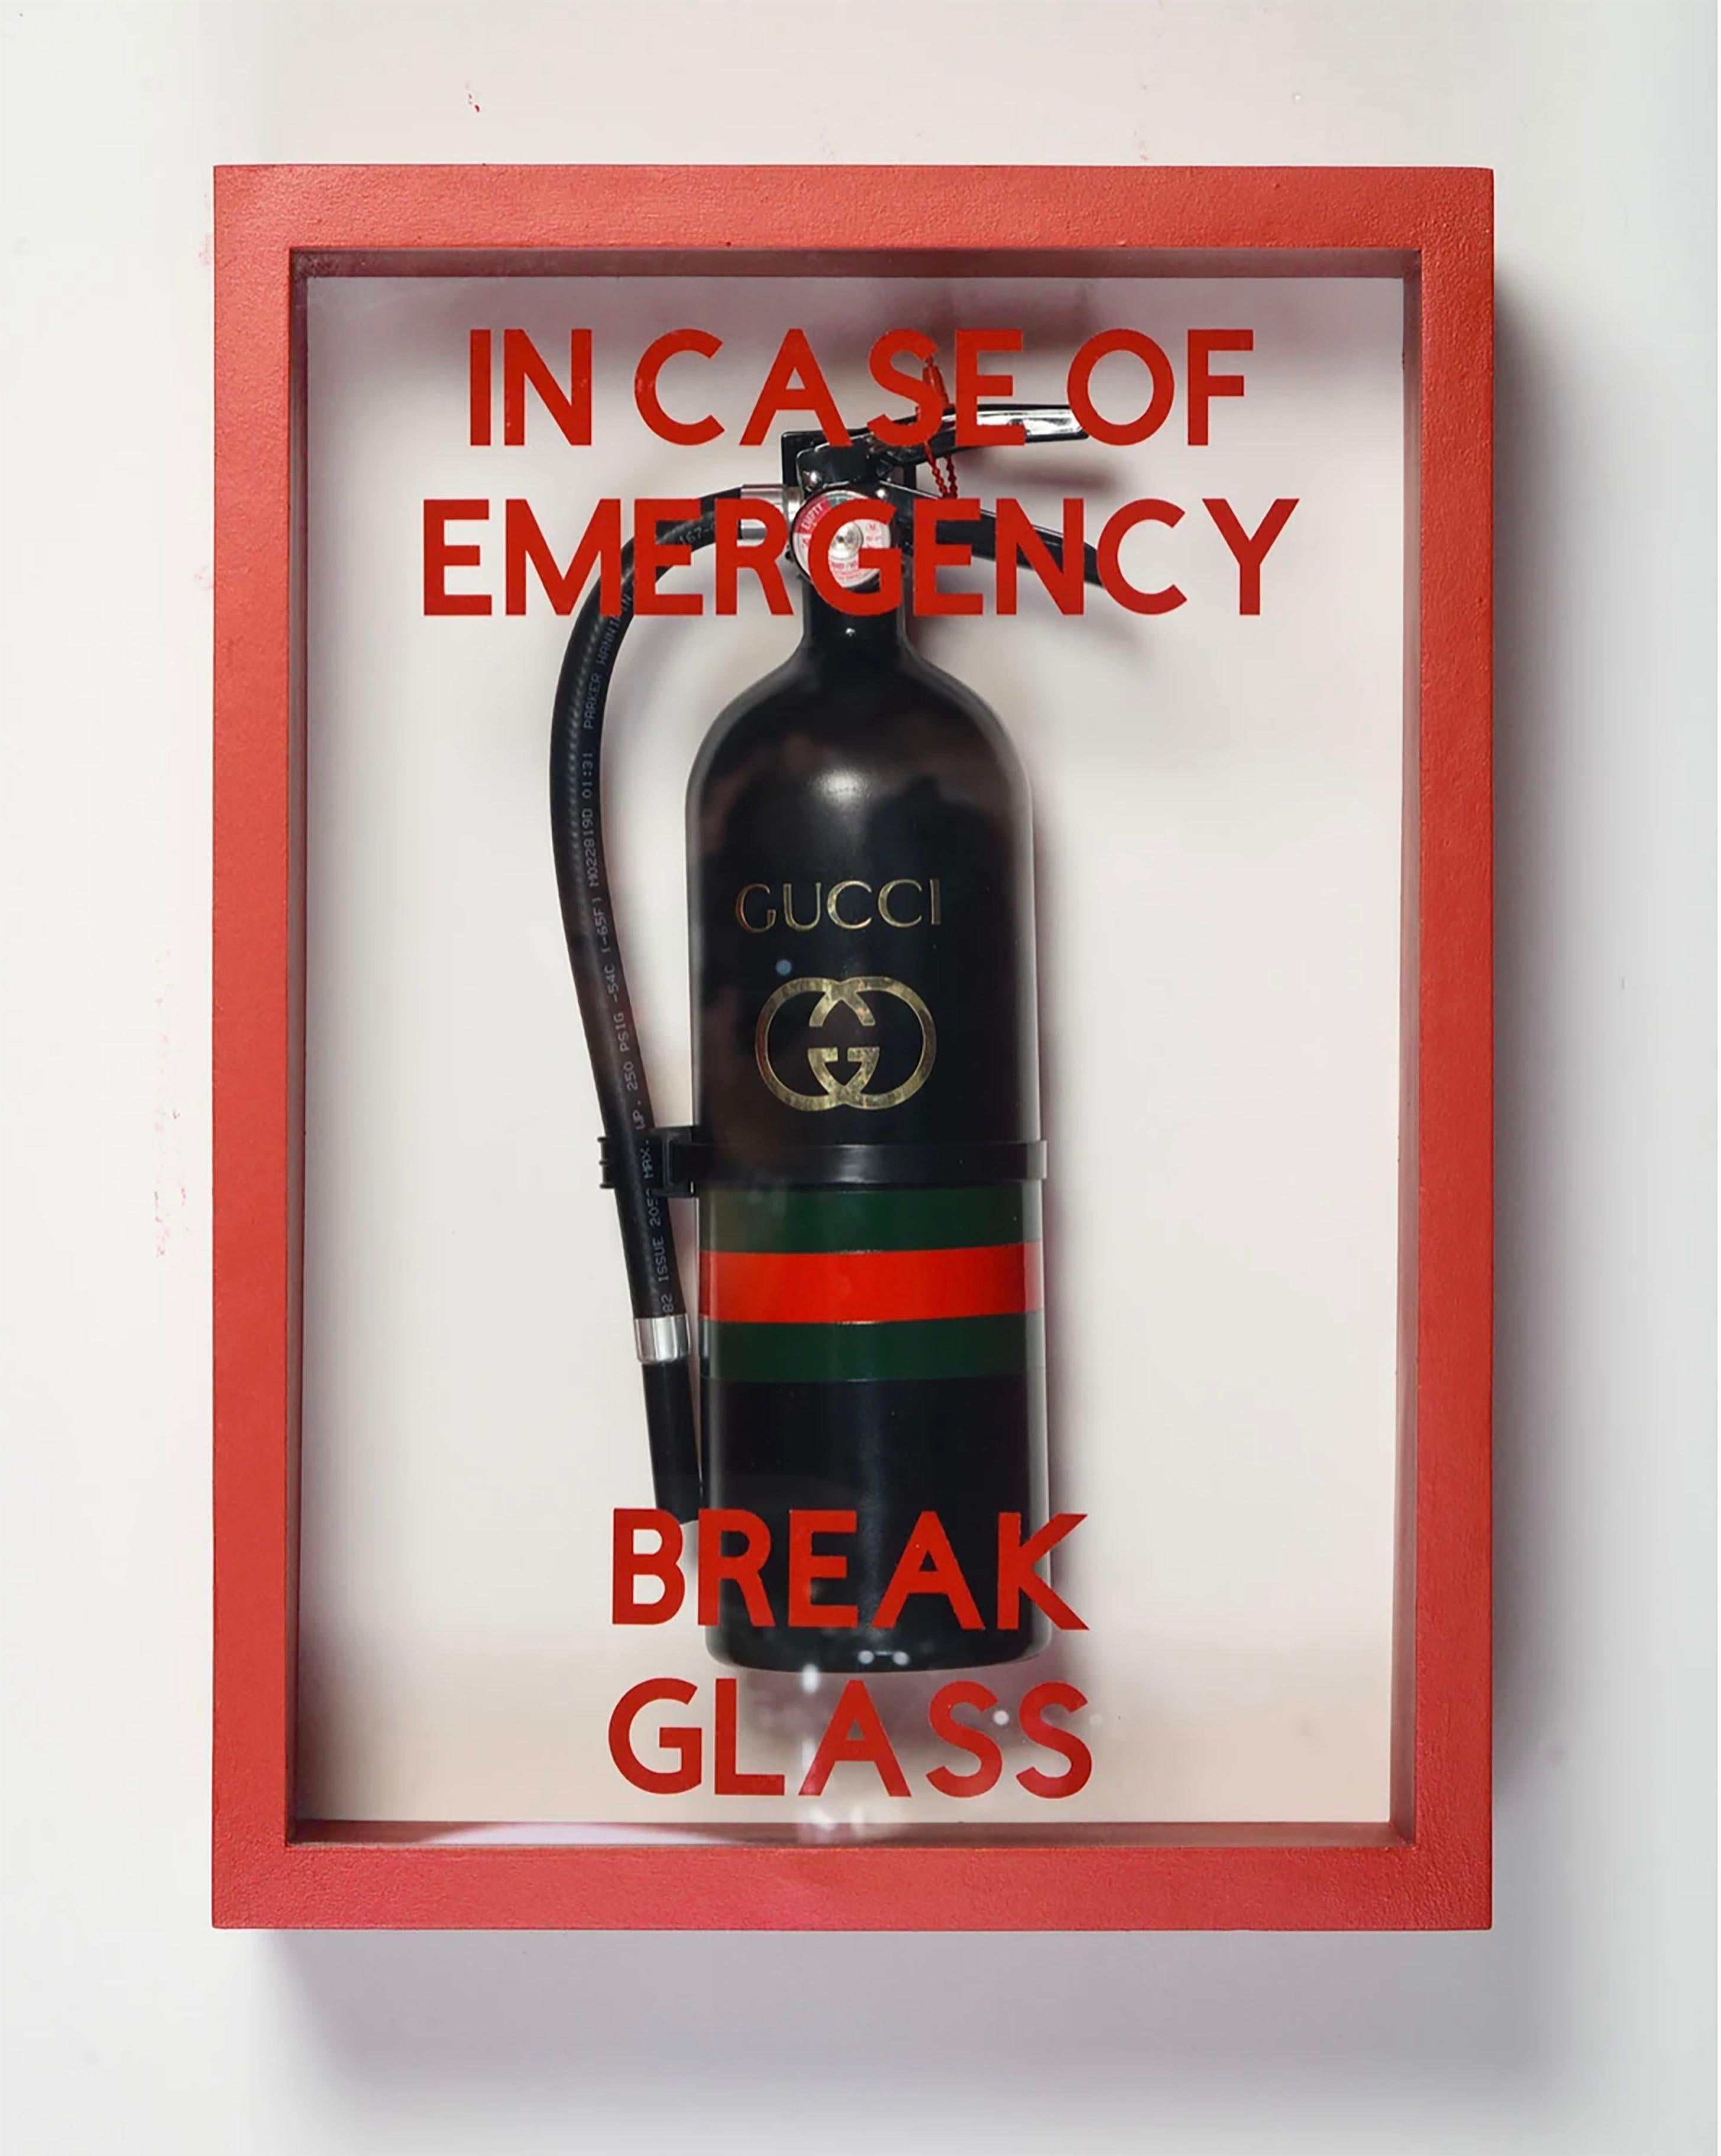 "In Case of Emergency Break Glass" Gucci Luxury Brand Edition Fire Extinguisher 